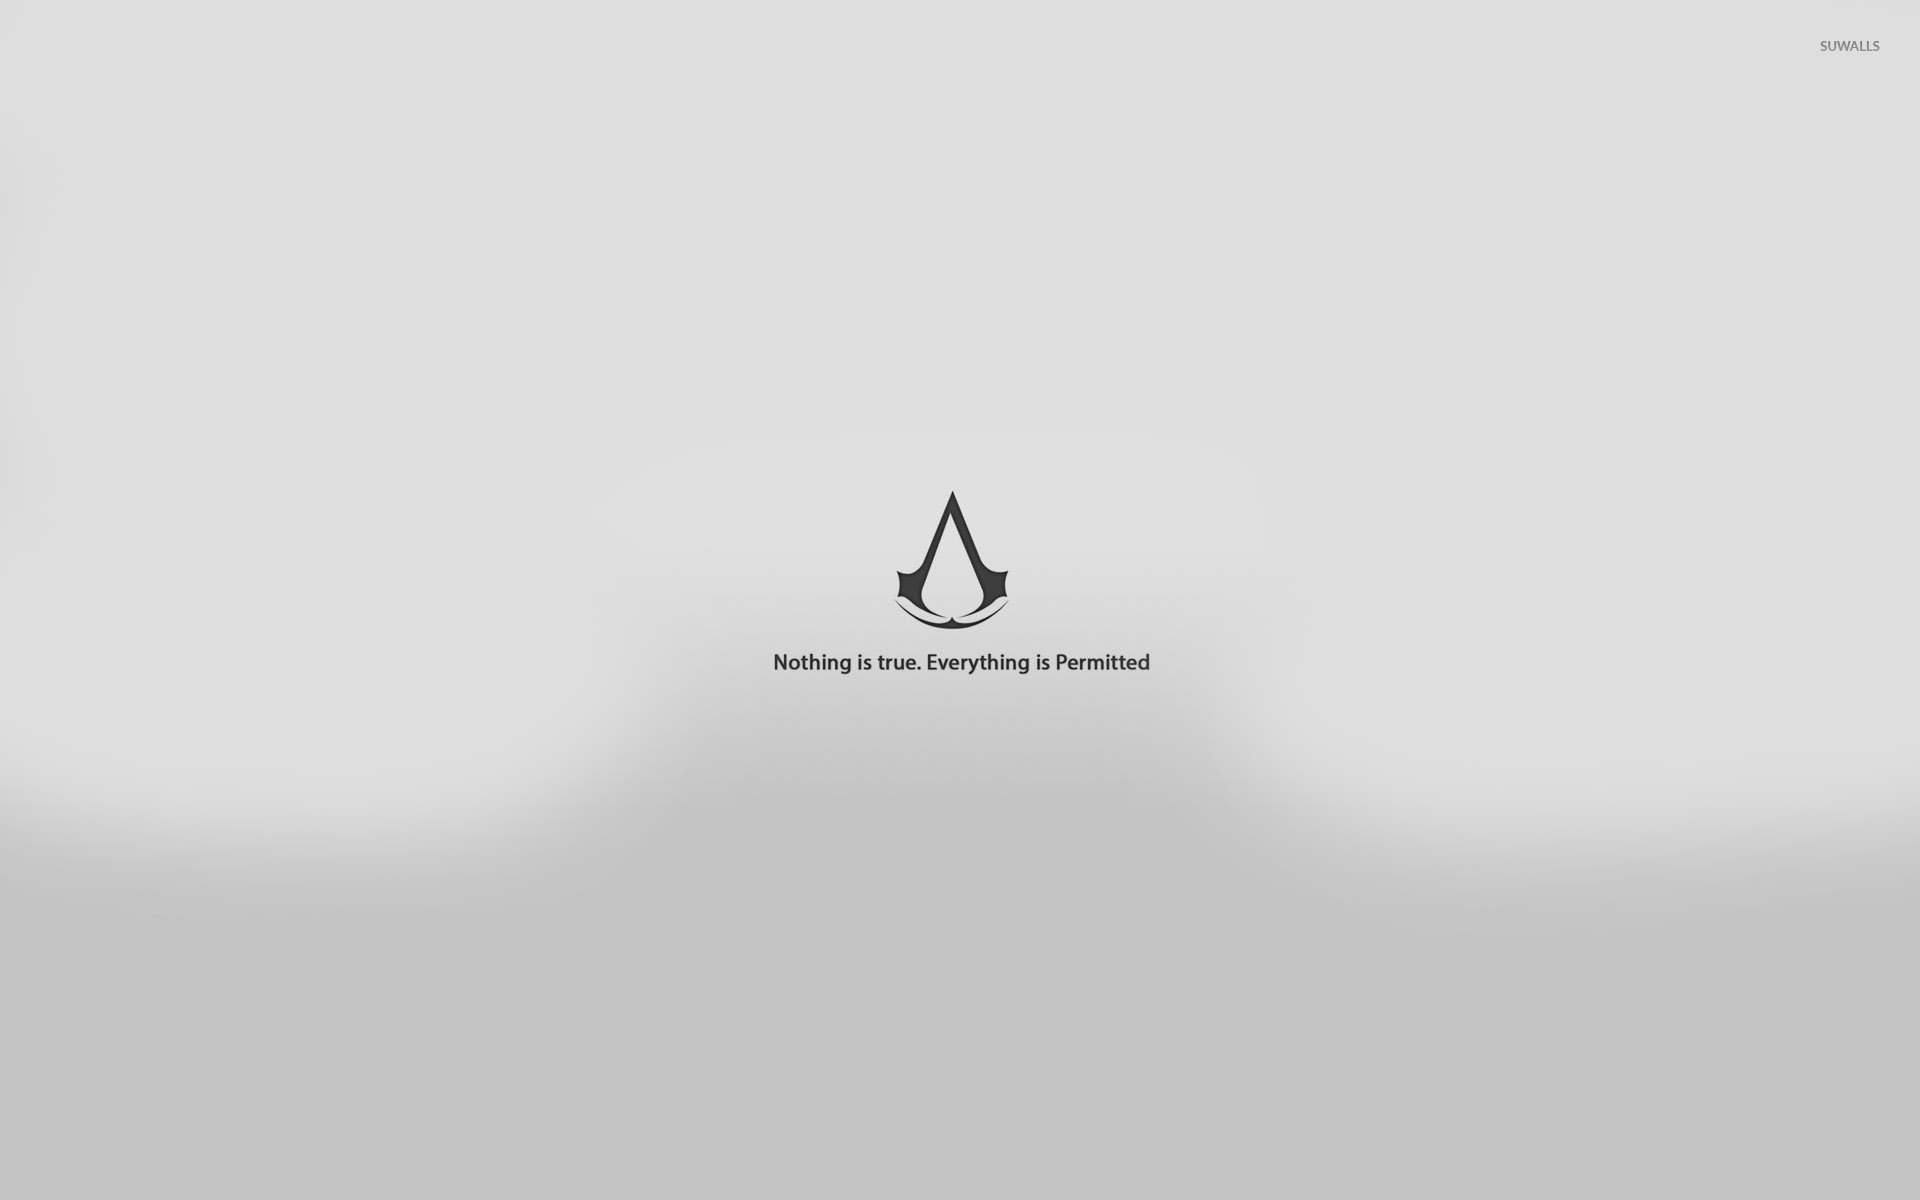 Nothing is true. Everything is permitted wallpaper - Game wallpapers ...